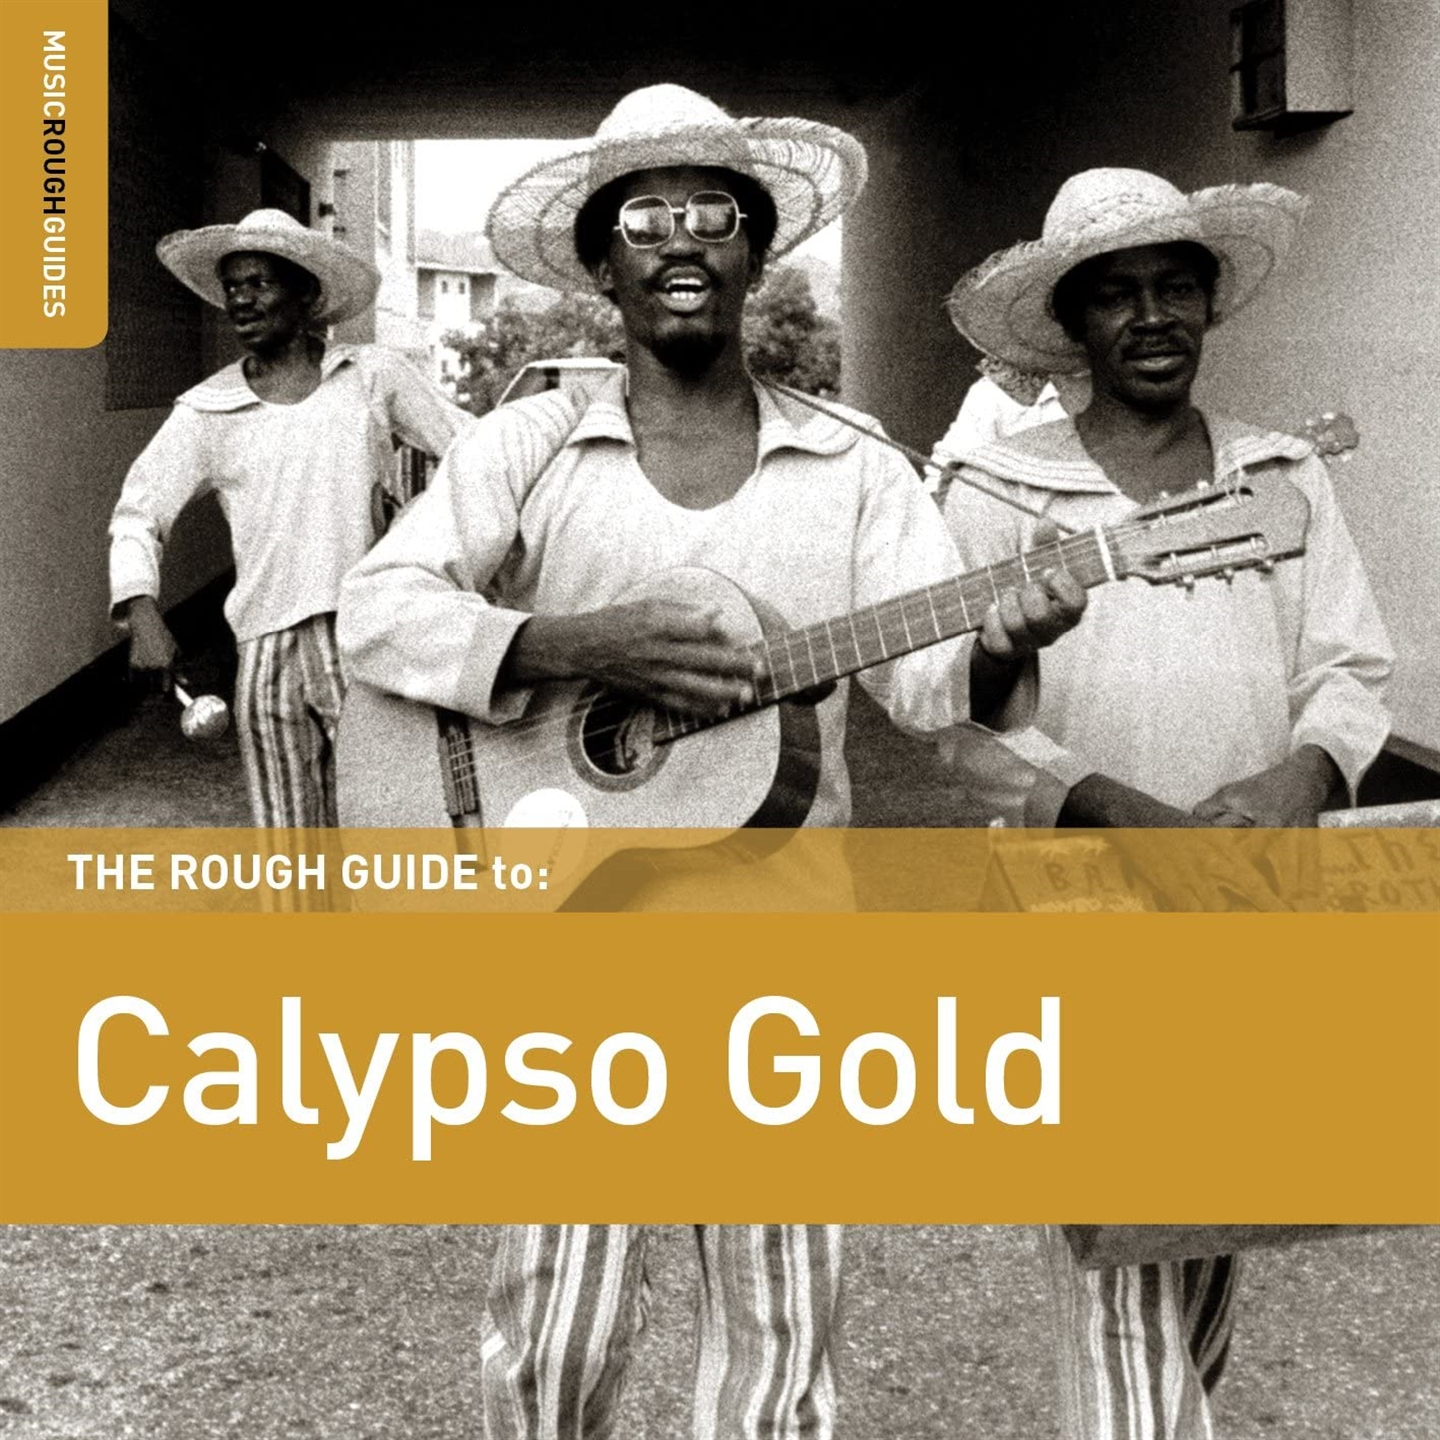 THE ROUGH GUIDE TO CALYPSO GOLD [LP]